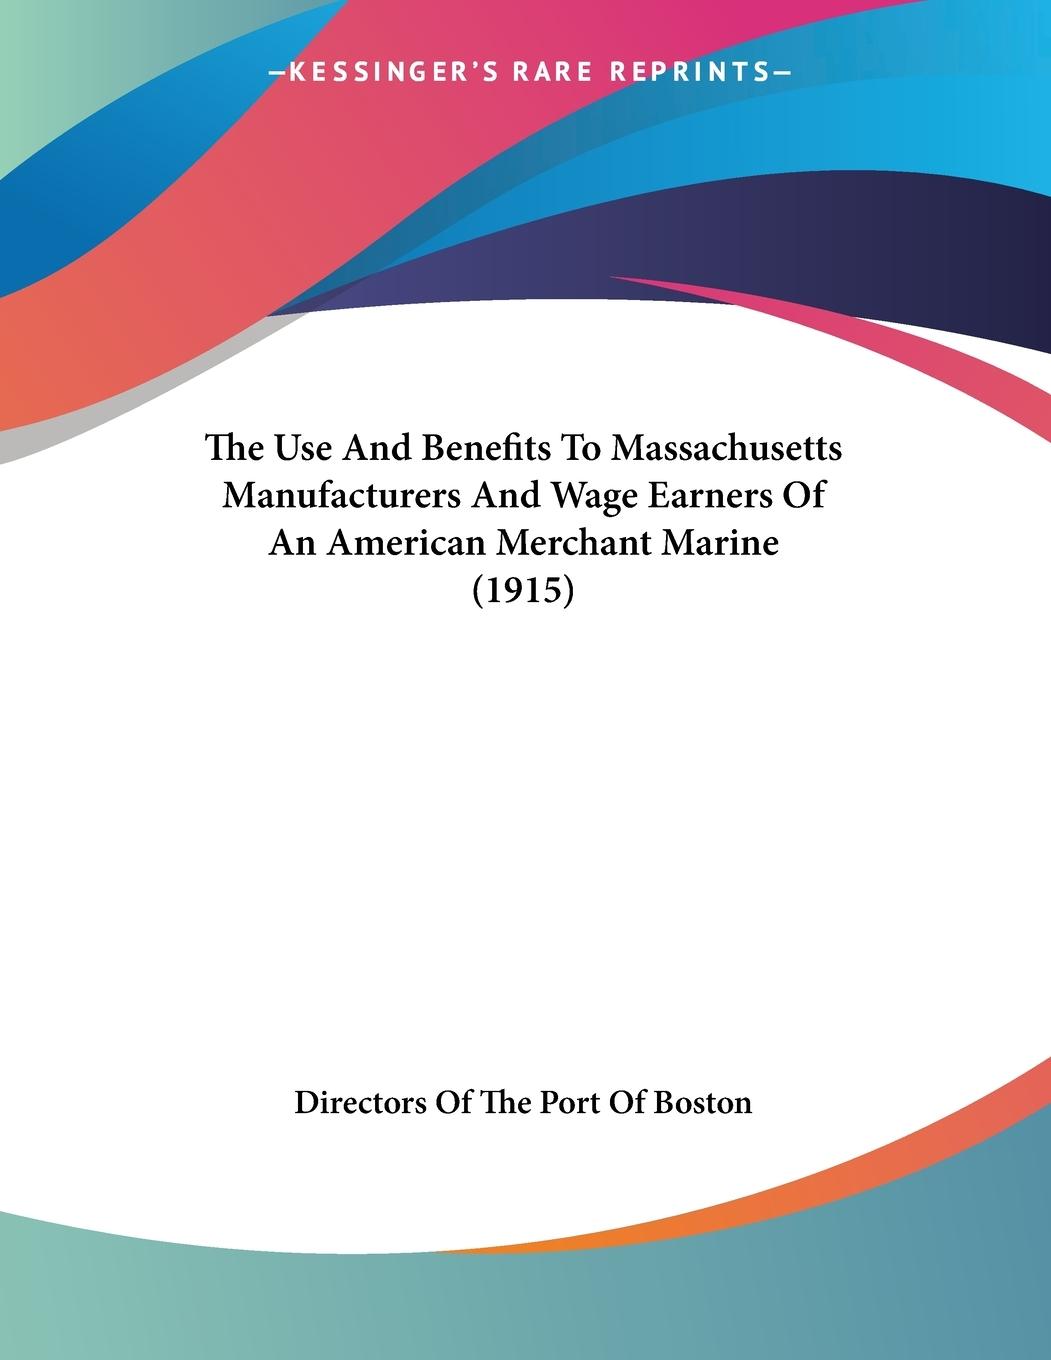 The Use And Benefits To Massachusetts Manufacturers And Wage Earners Of An American Merchant Marine (1915) - Directors Of The Port Of Boston